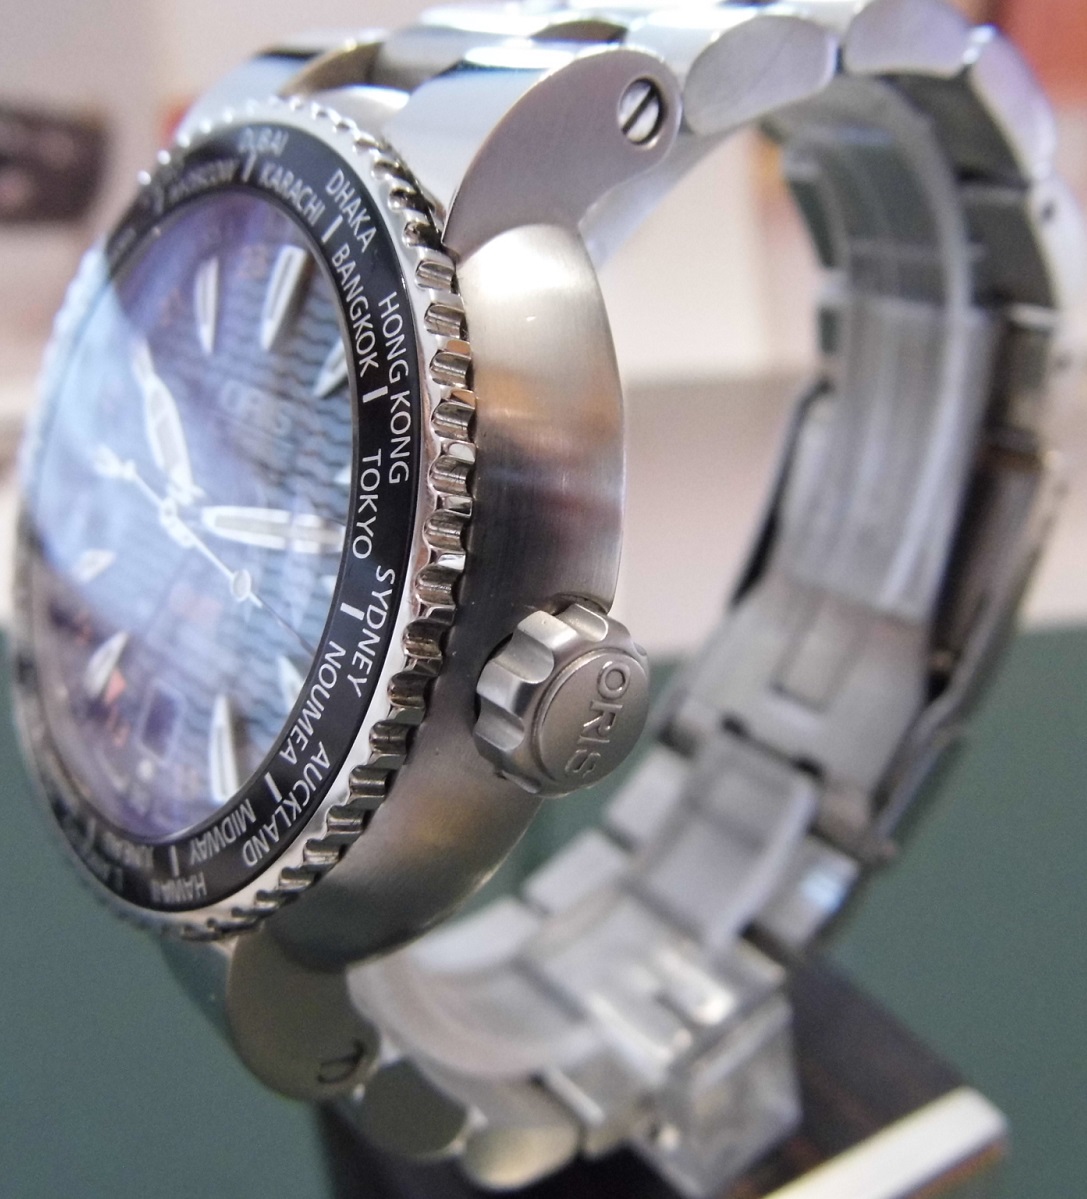 Pre owned / used watches from Quality Time Watches UK - Please enter